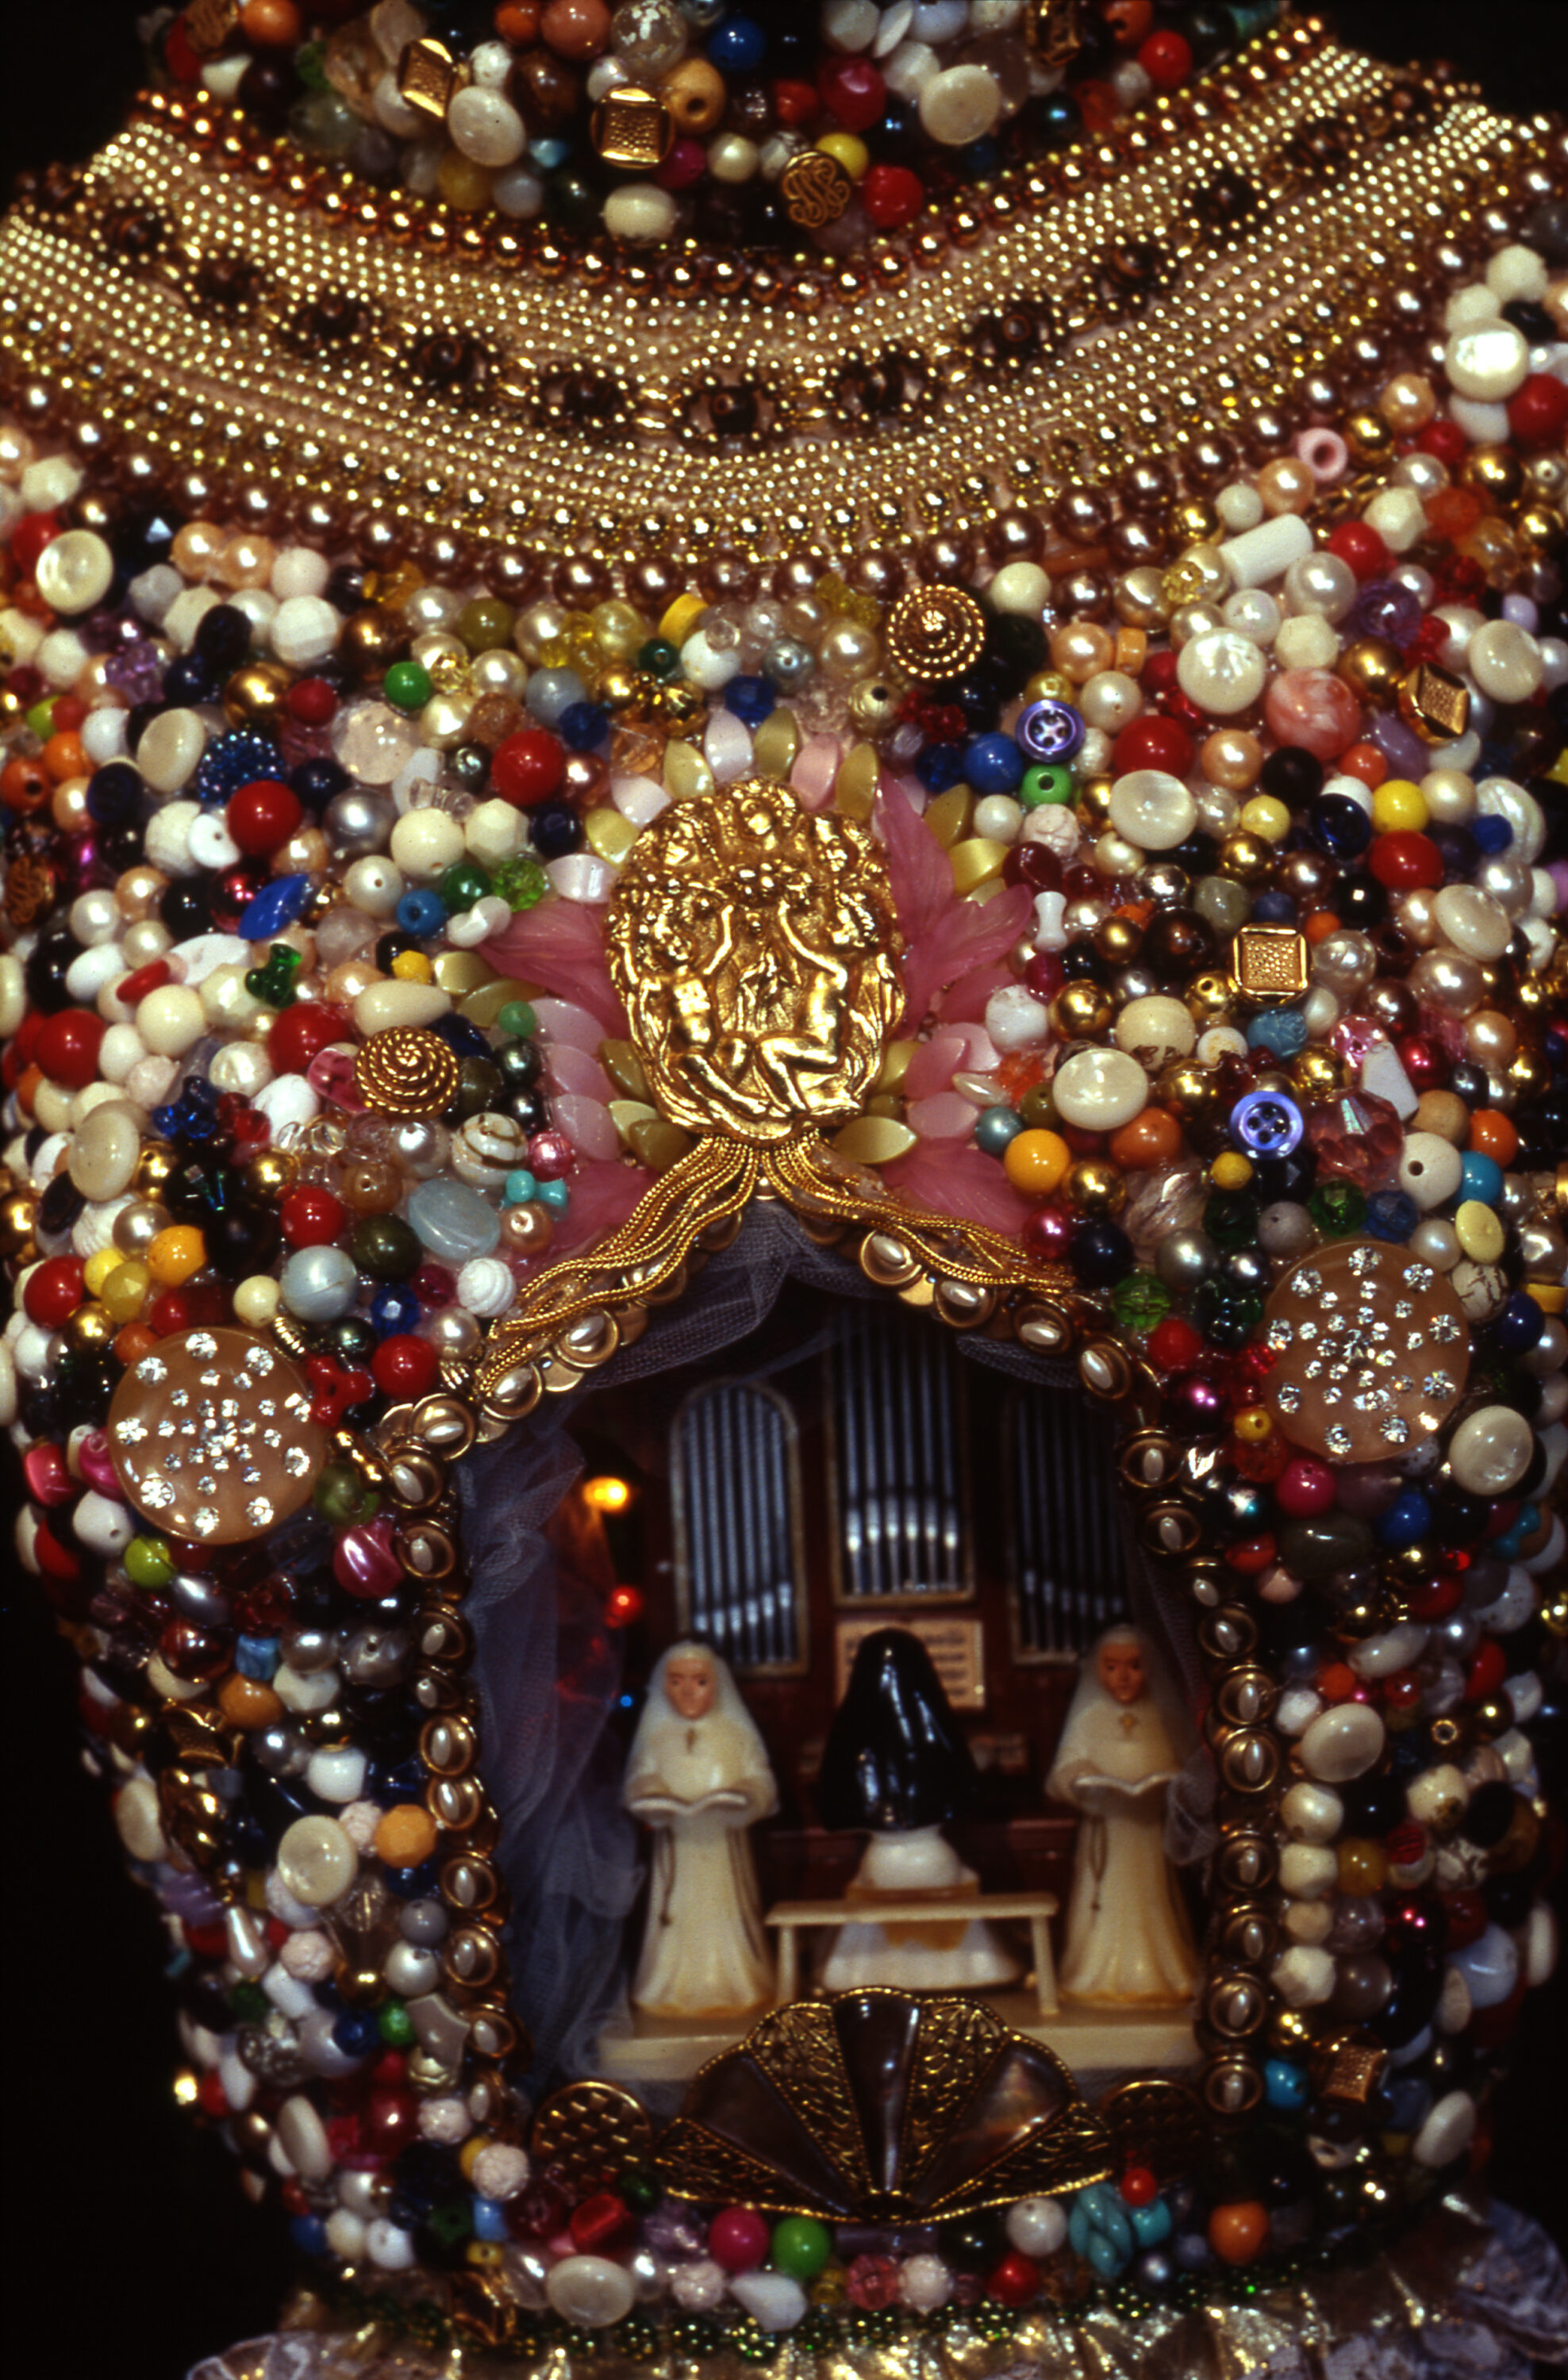 A hole in colorful beading with figures inside. The figures are a person in a veil and long dress sitting at an organ with two light-skinned people in the same attire holding open Bibles on either side of the organ.